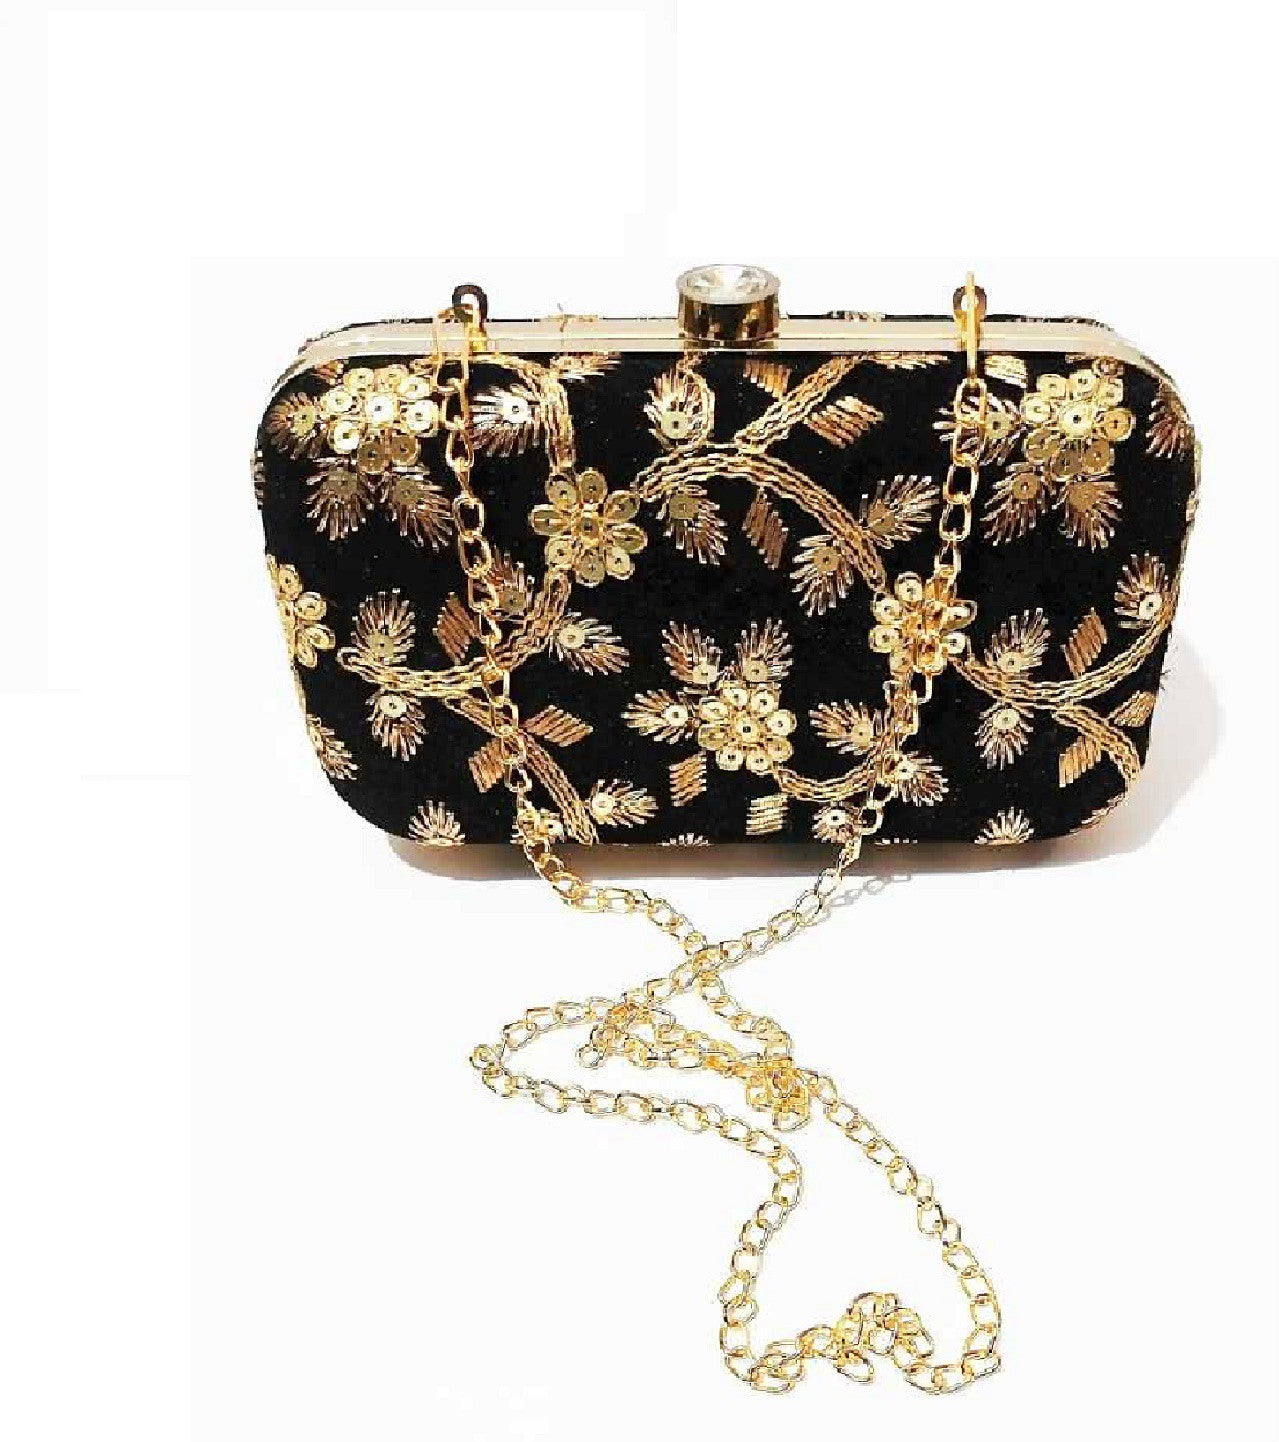 Beautiful Purse Bag for Party - Add a Pop of Vibrant Elegance